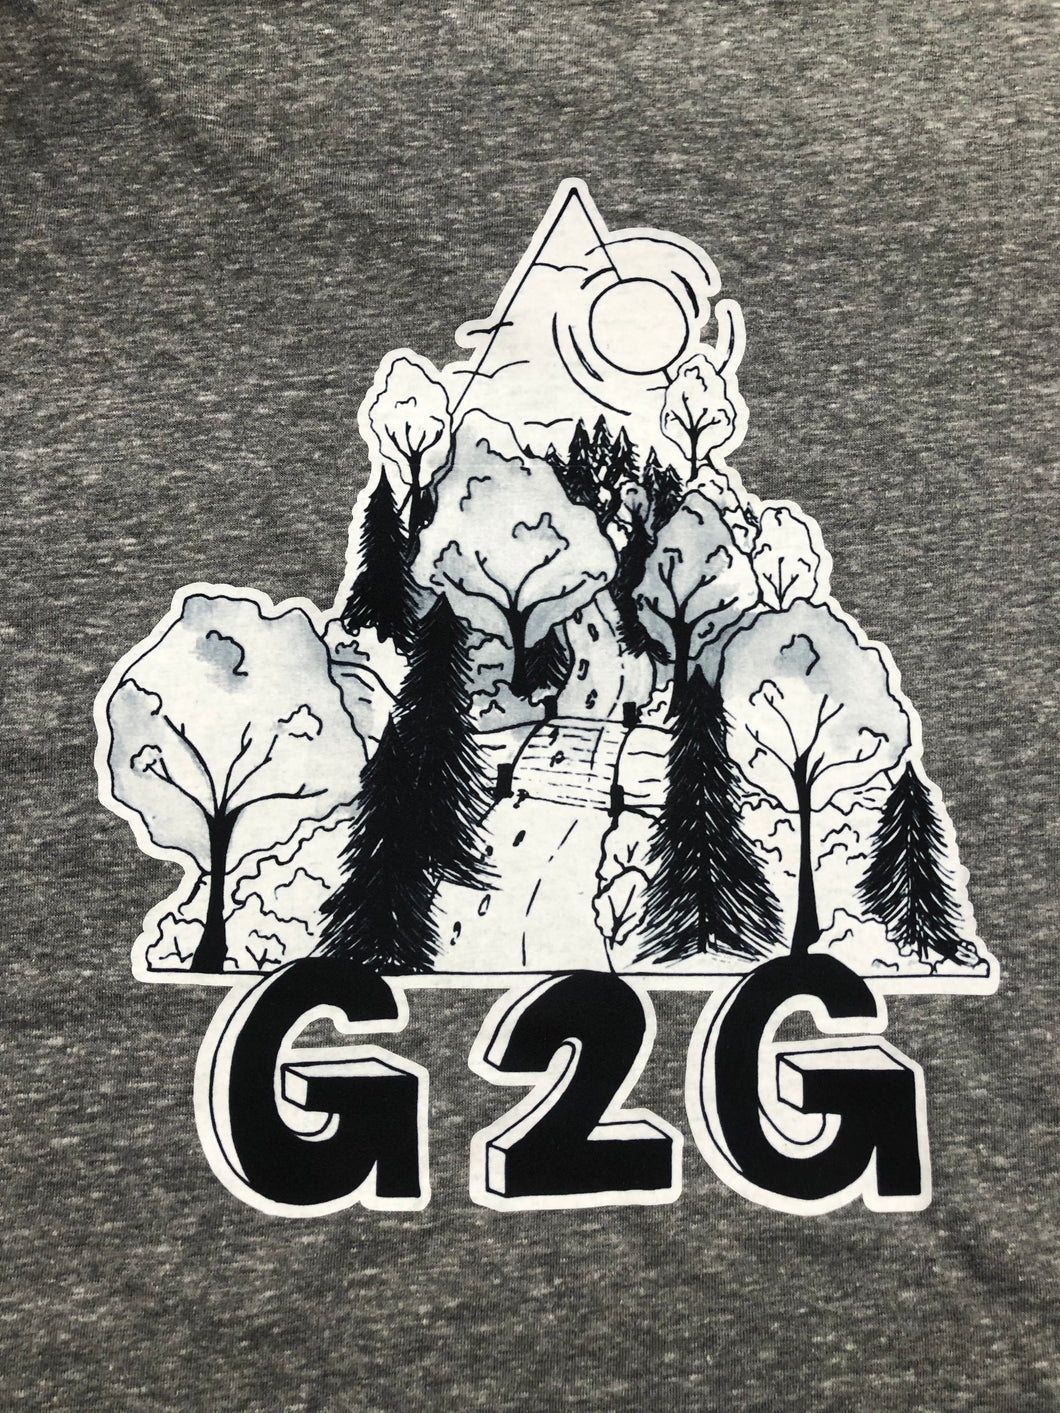 Men’s T-shirt to Raise Funds for G2G - Gray